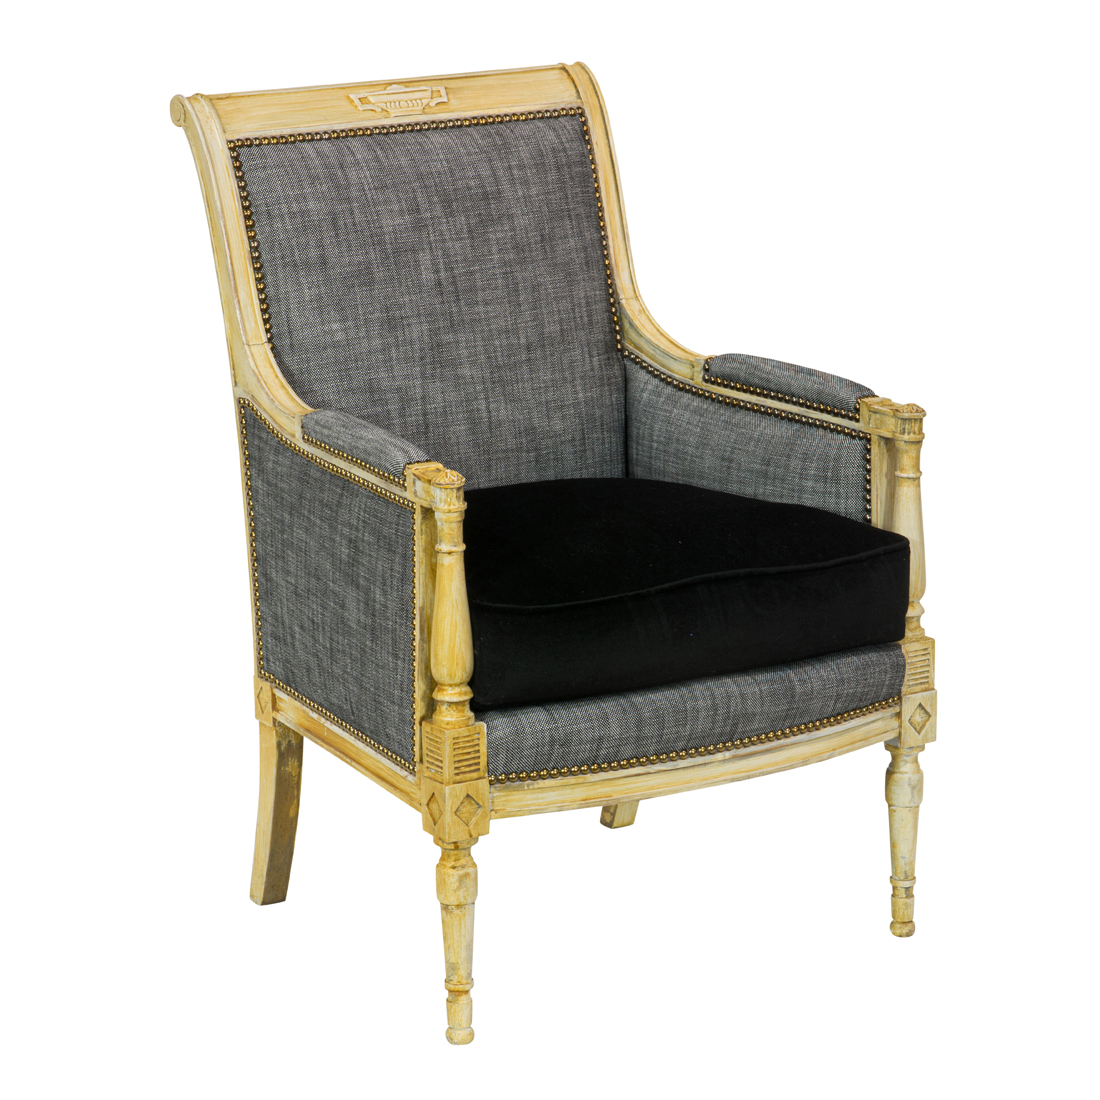 A NEOCLASSICAL STYLE PAINTED BERGERE